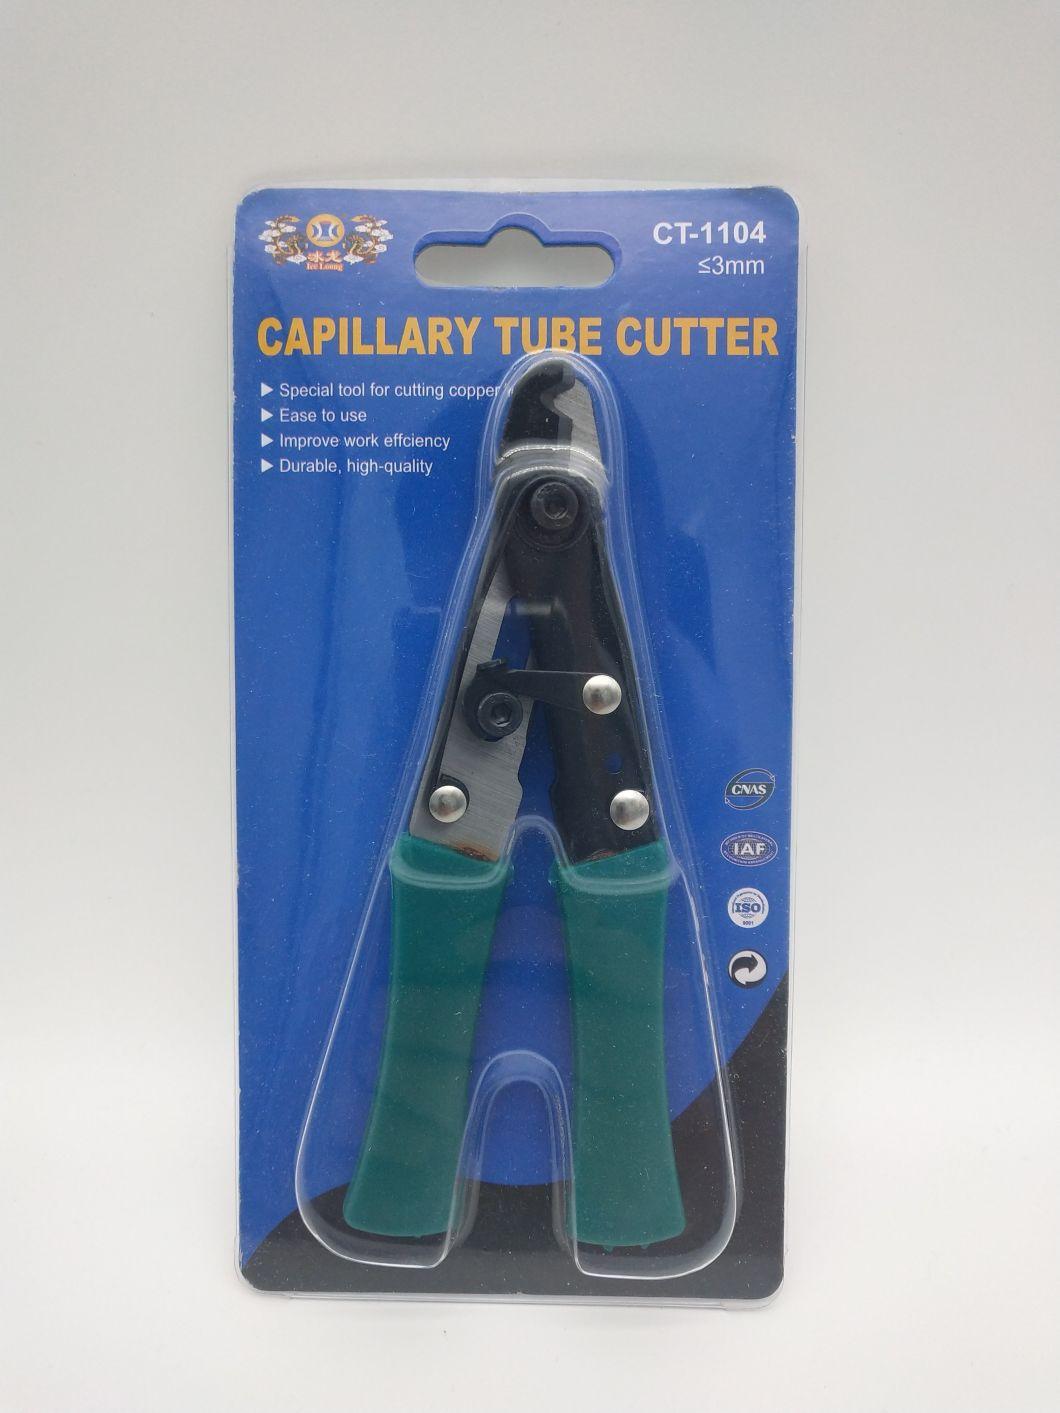 Capillary Tube Cutter CT-1104 for AC Service